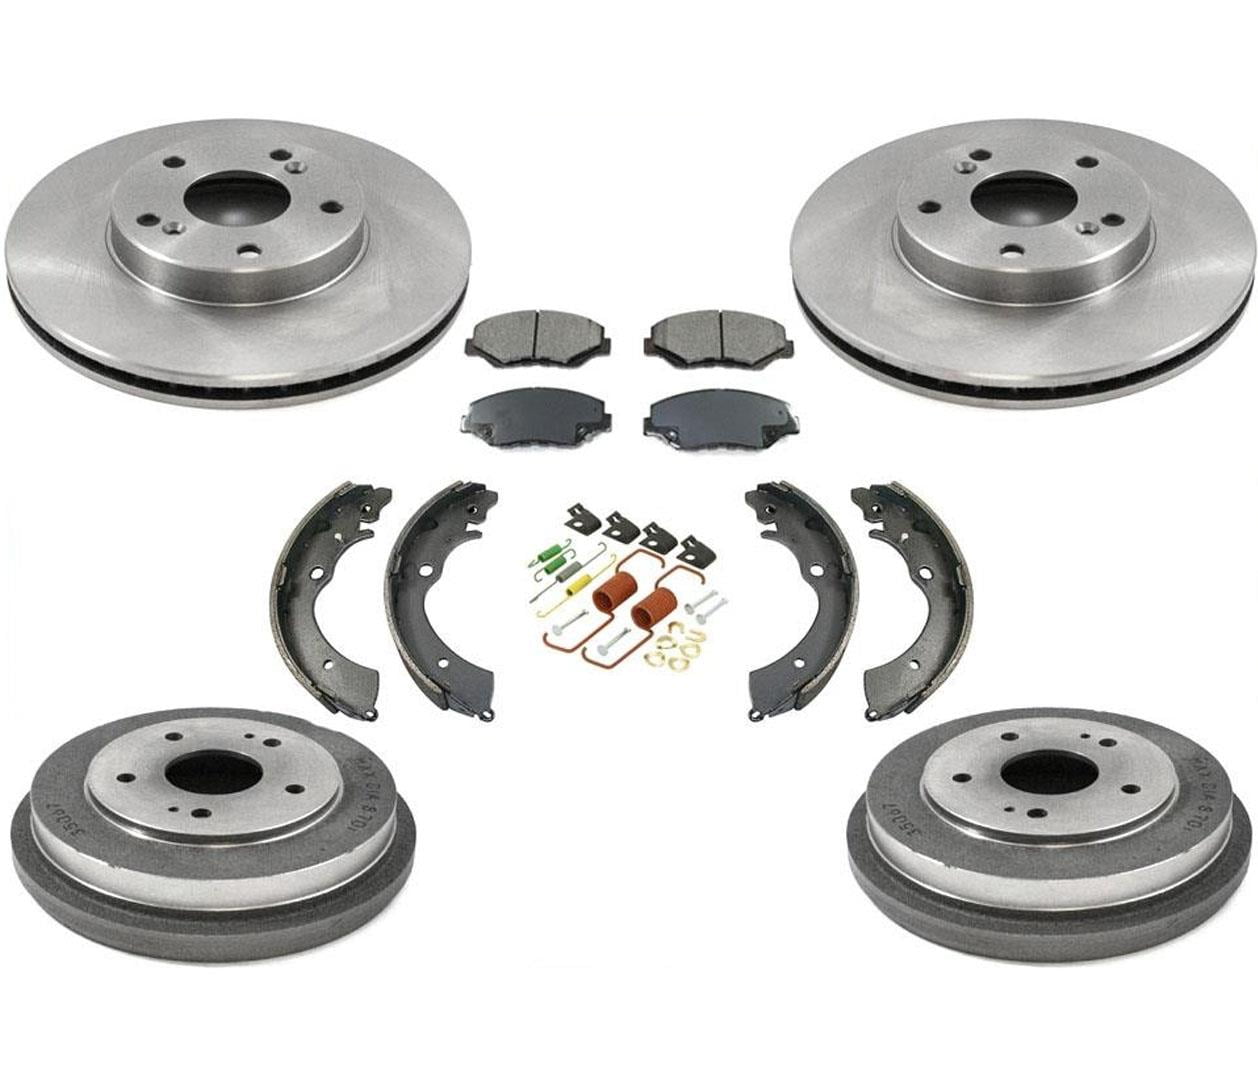 2 Brake Drums & Brake Shoes 11-12 Replacement Part For VW Jetta 2.0L 2.5L  With Rear Drum Brakes